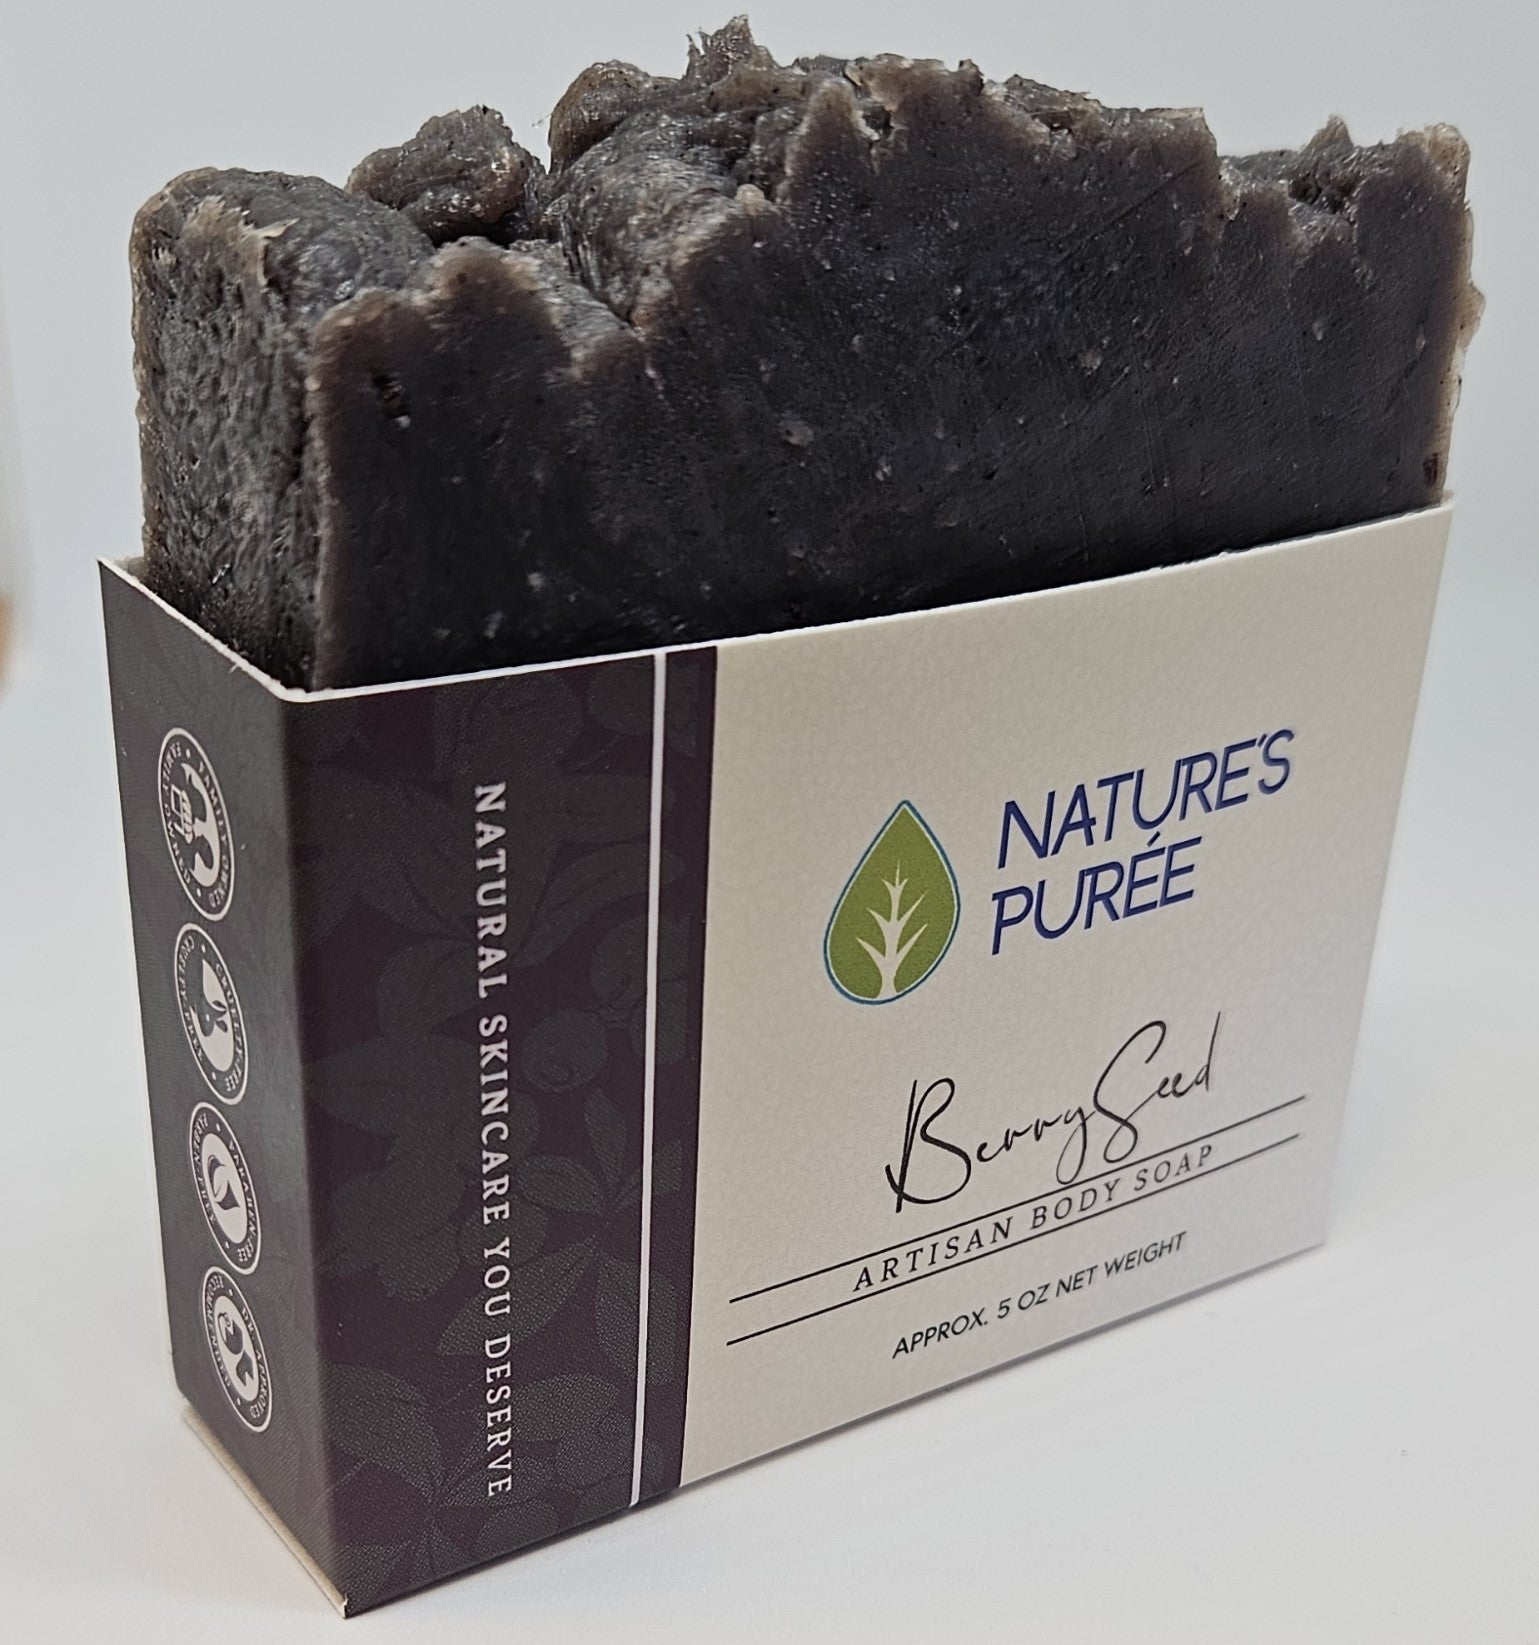 NATURES'S PURÉE BERRYSEED BODY SOAP SUBSCRIPTION